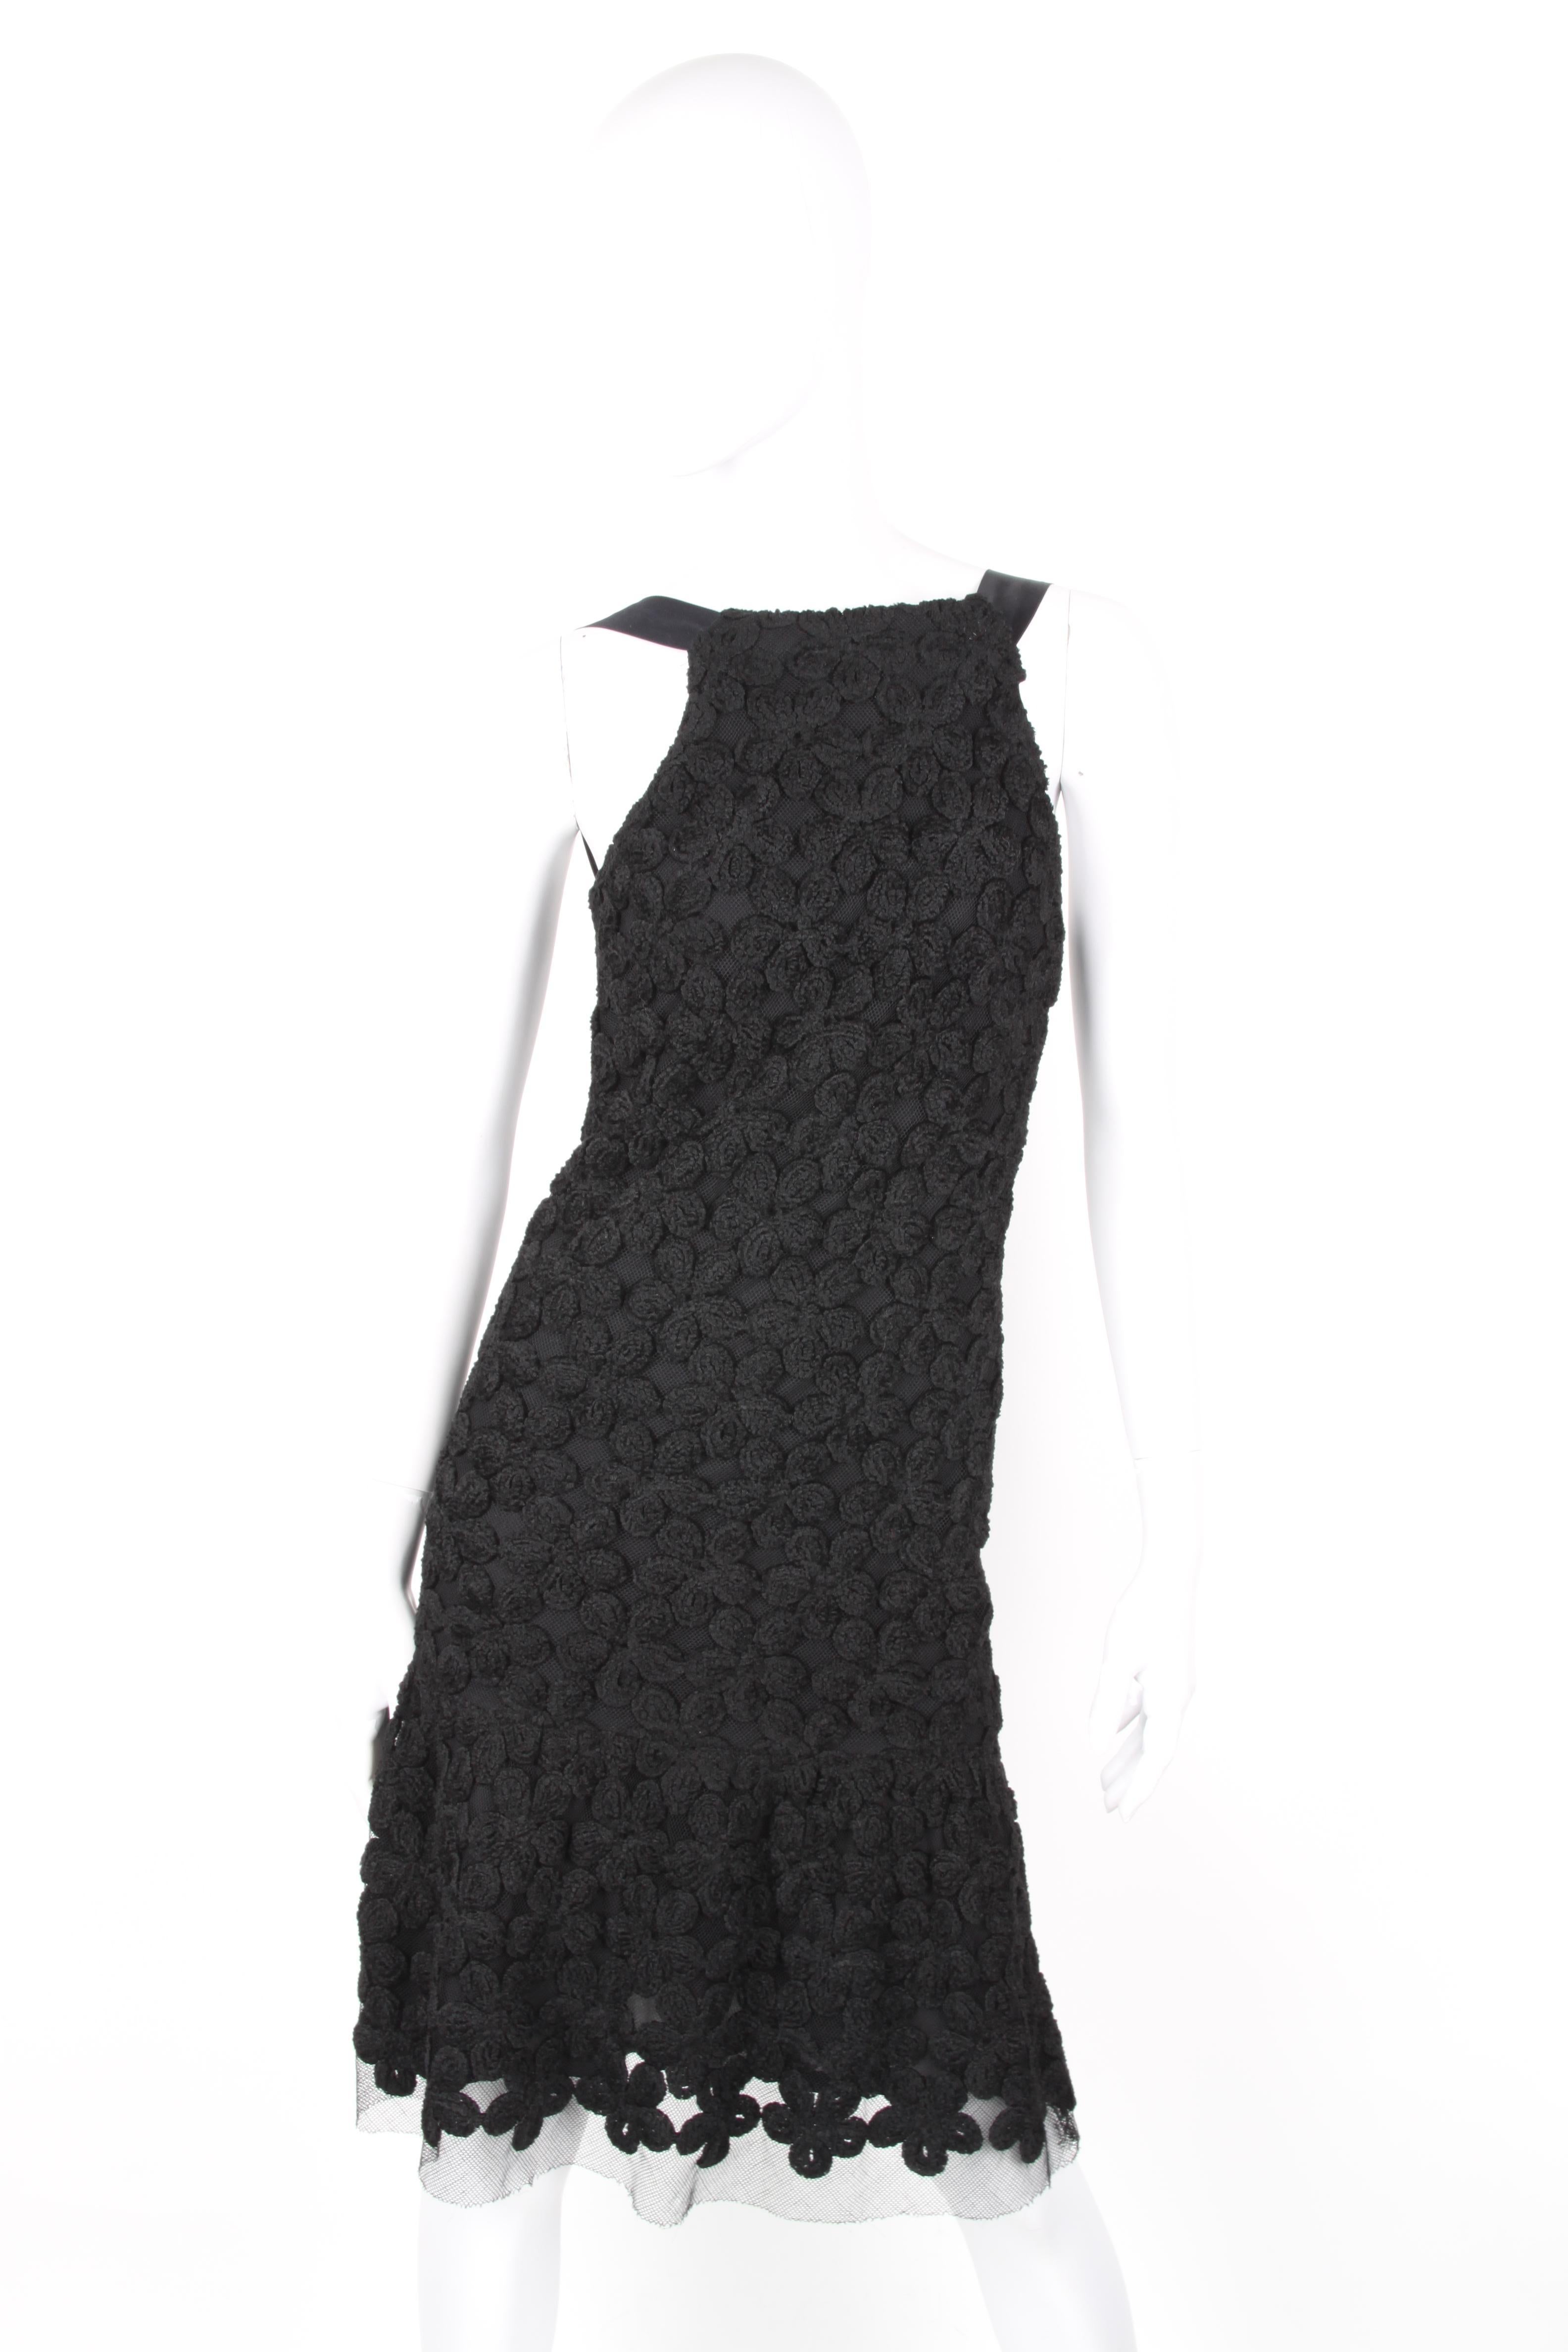 Chanel Fall/Winter 2005 Black Floral Crotchet Camelia Wool Mesh Dress.

Black wool dress accented with mesh paneling from Chanel: sheer fabric with camelia detail thoughout. Back zip and silk shouder details. Main fabric is wool and lined with